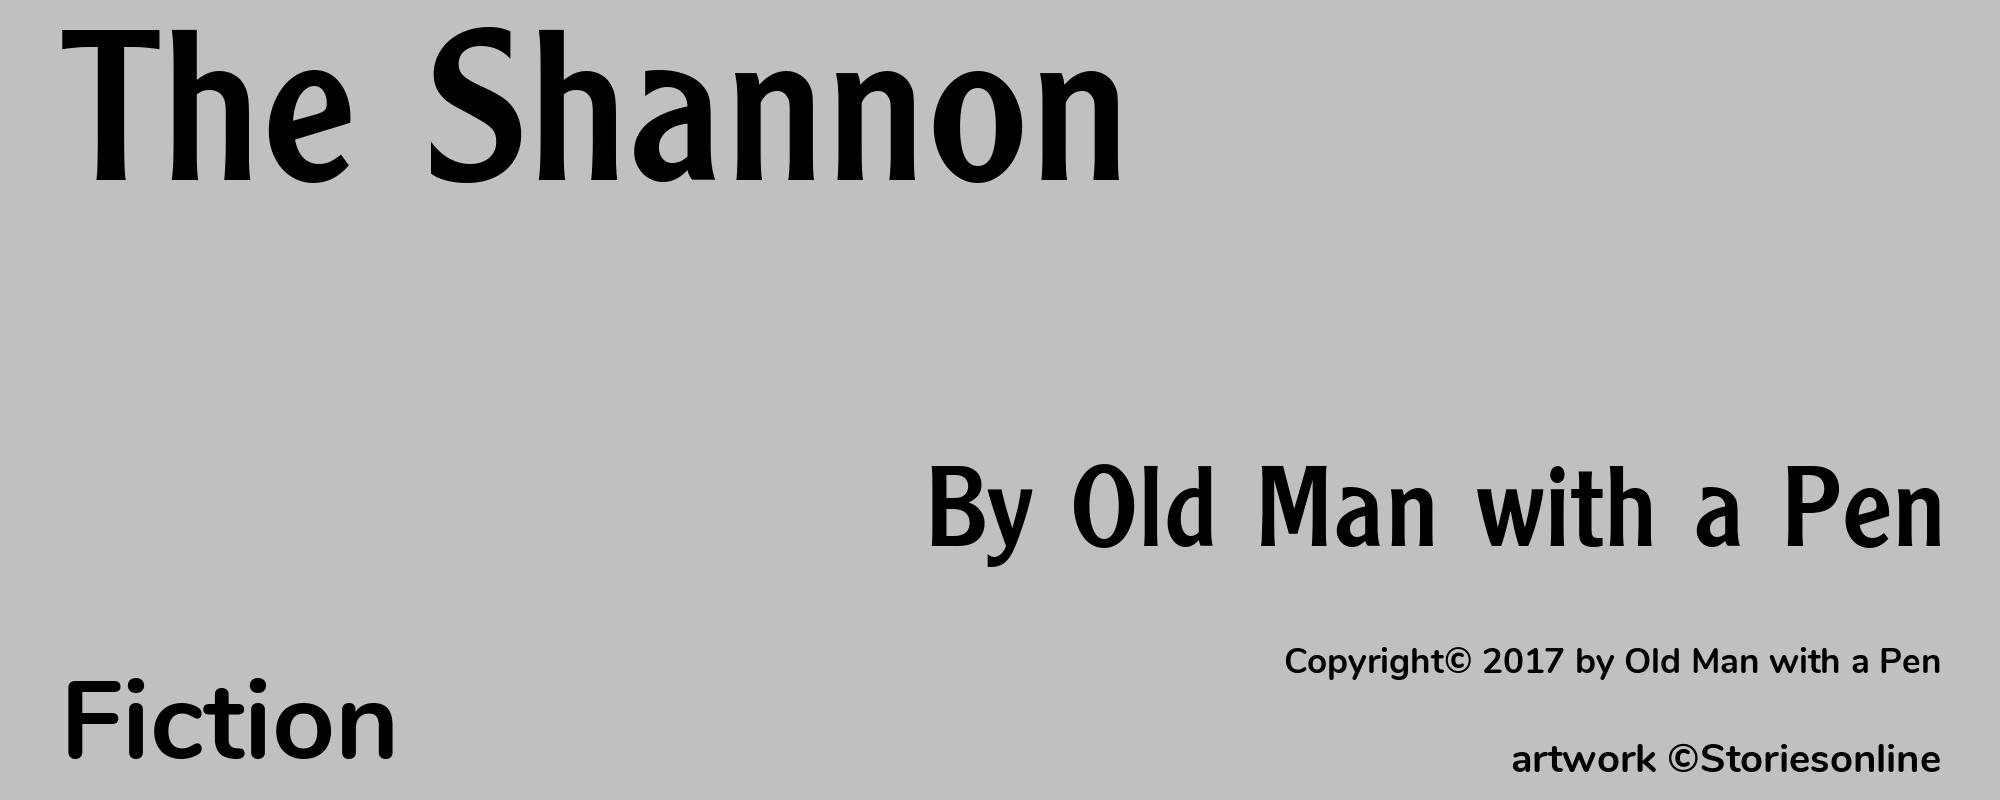 The Shannon - Cover